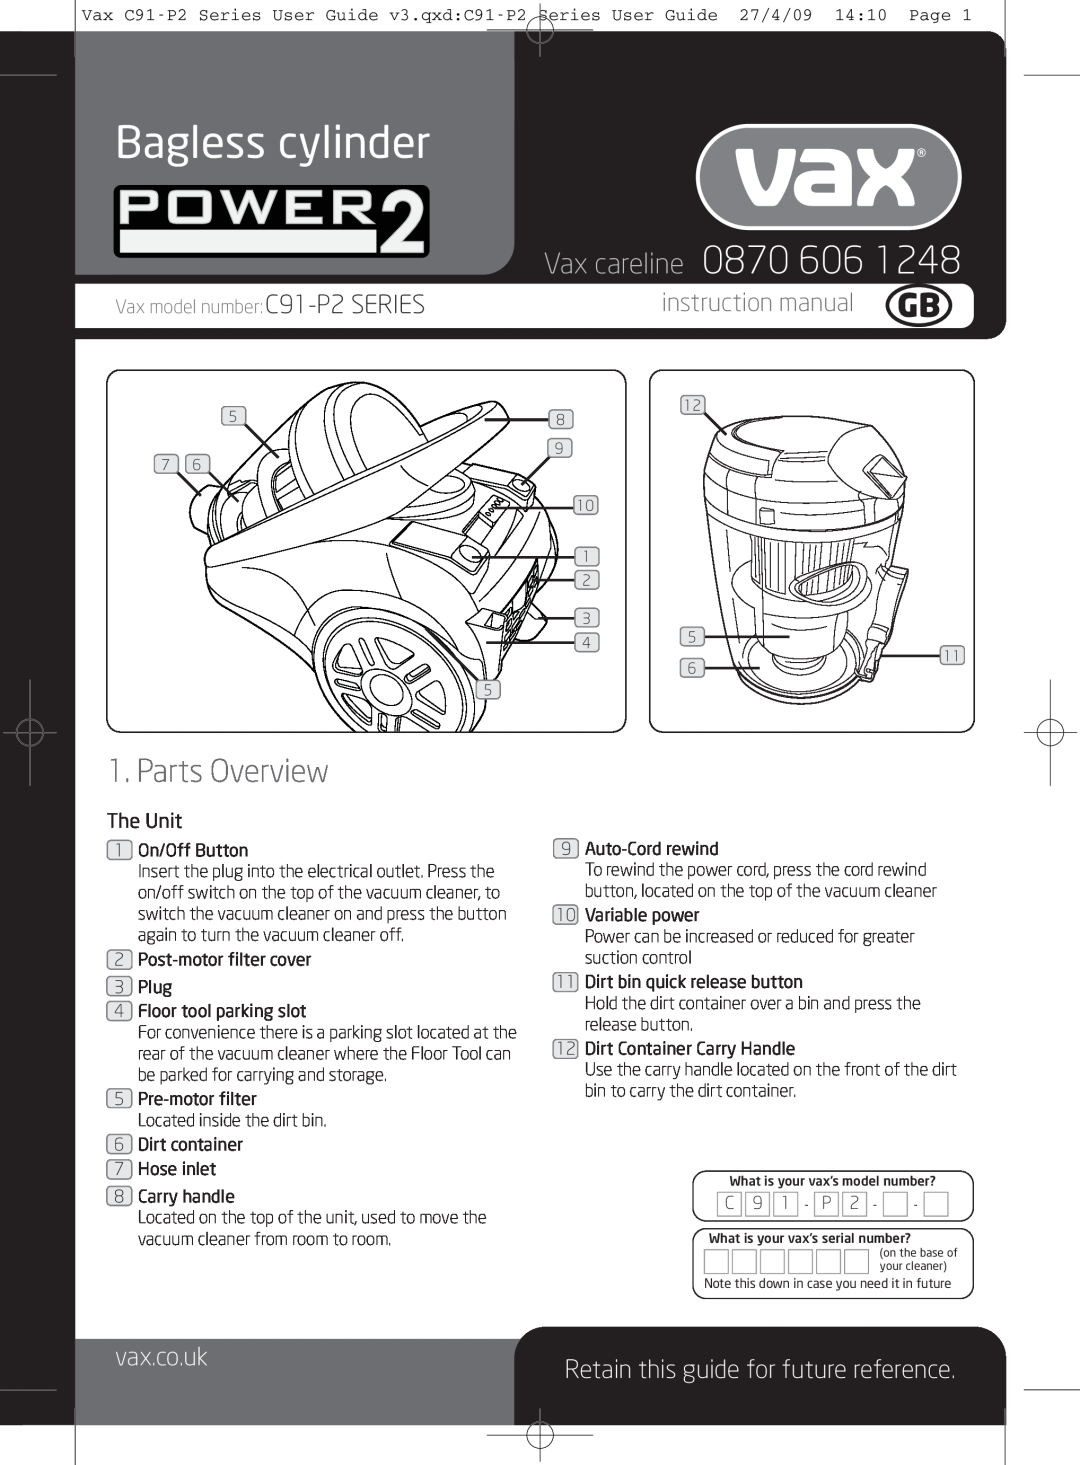 Vax C91-P2 instruction manual power2, Parts Overview, Bagless cylinder, Vax careline, vax.co.uk, The Unit 